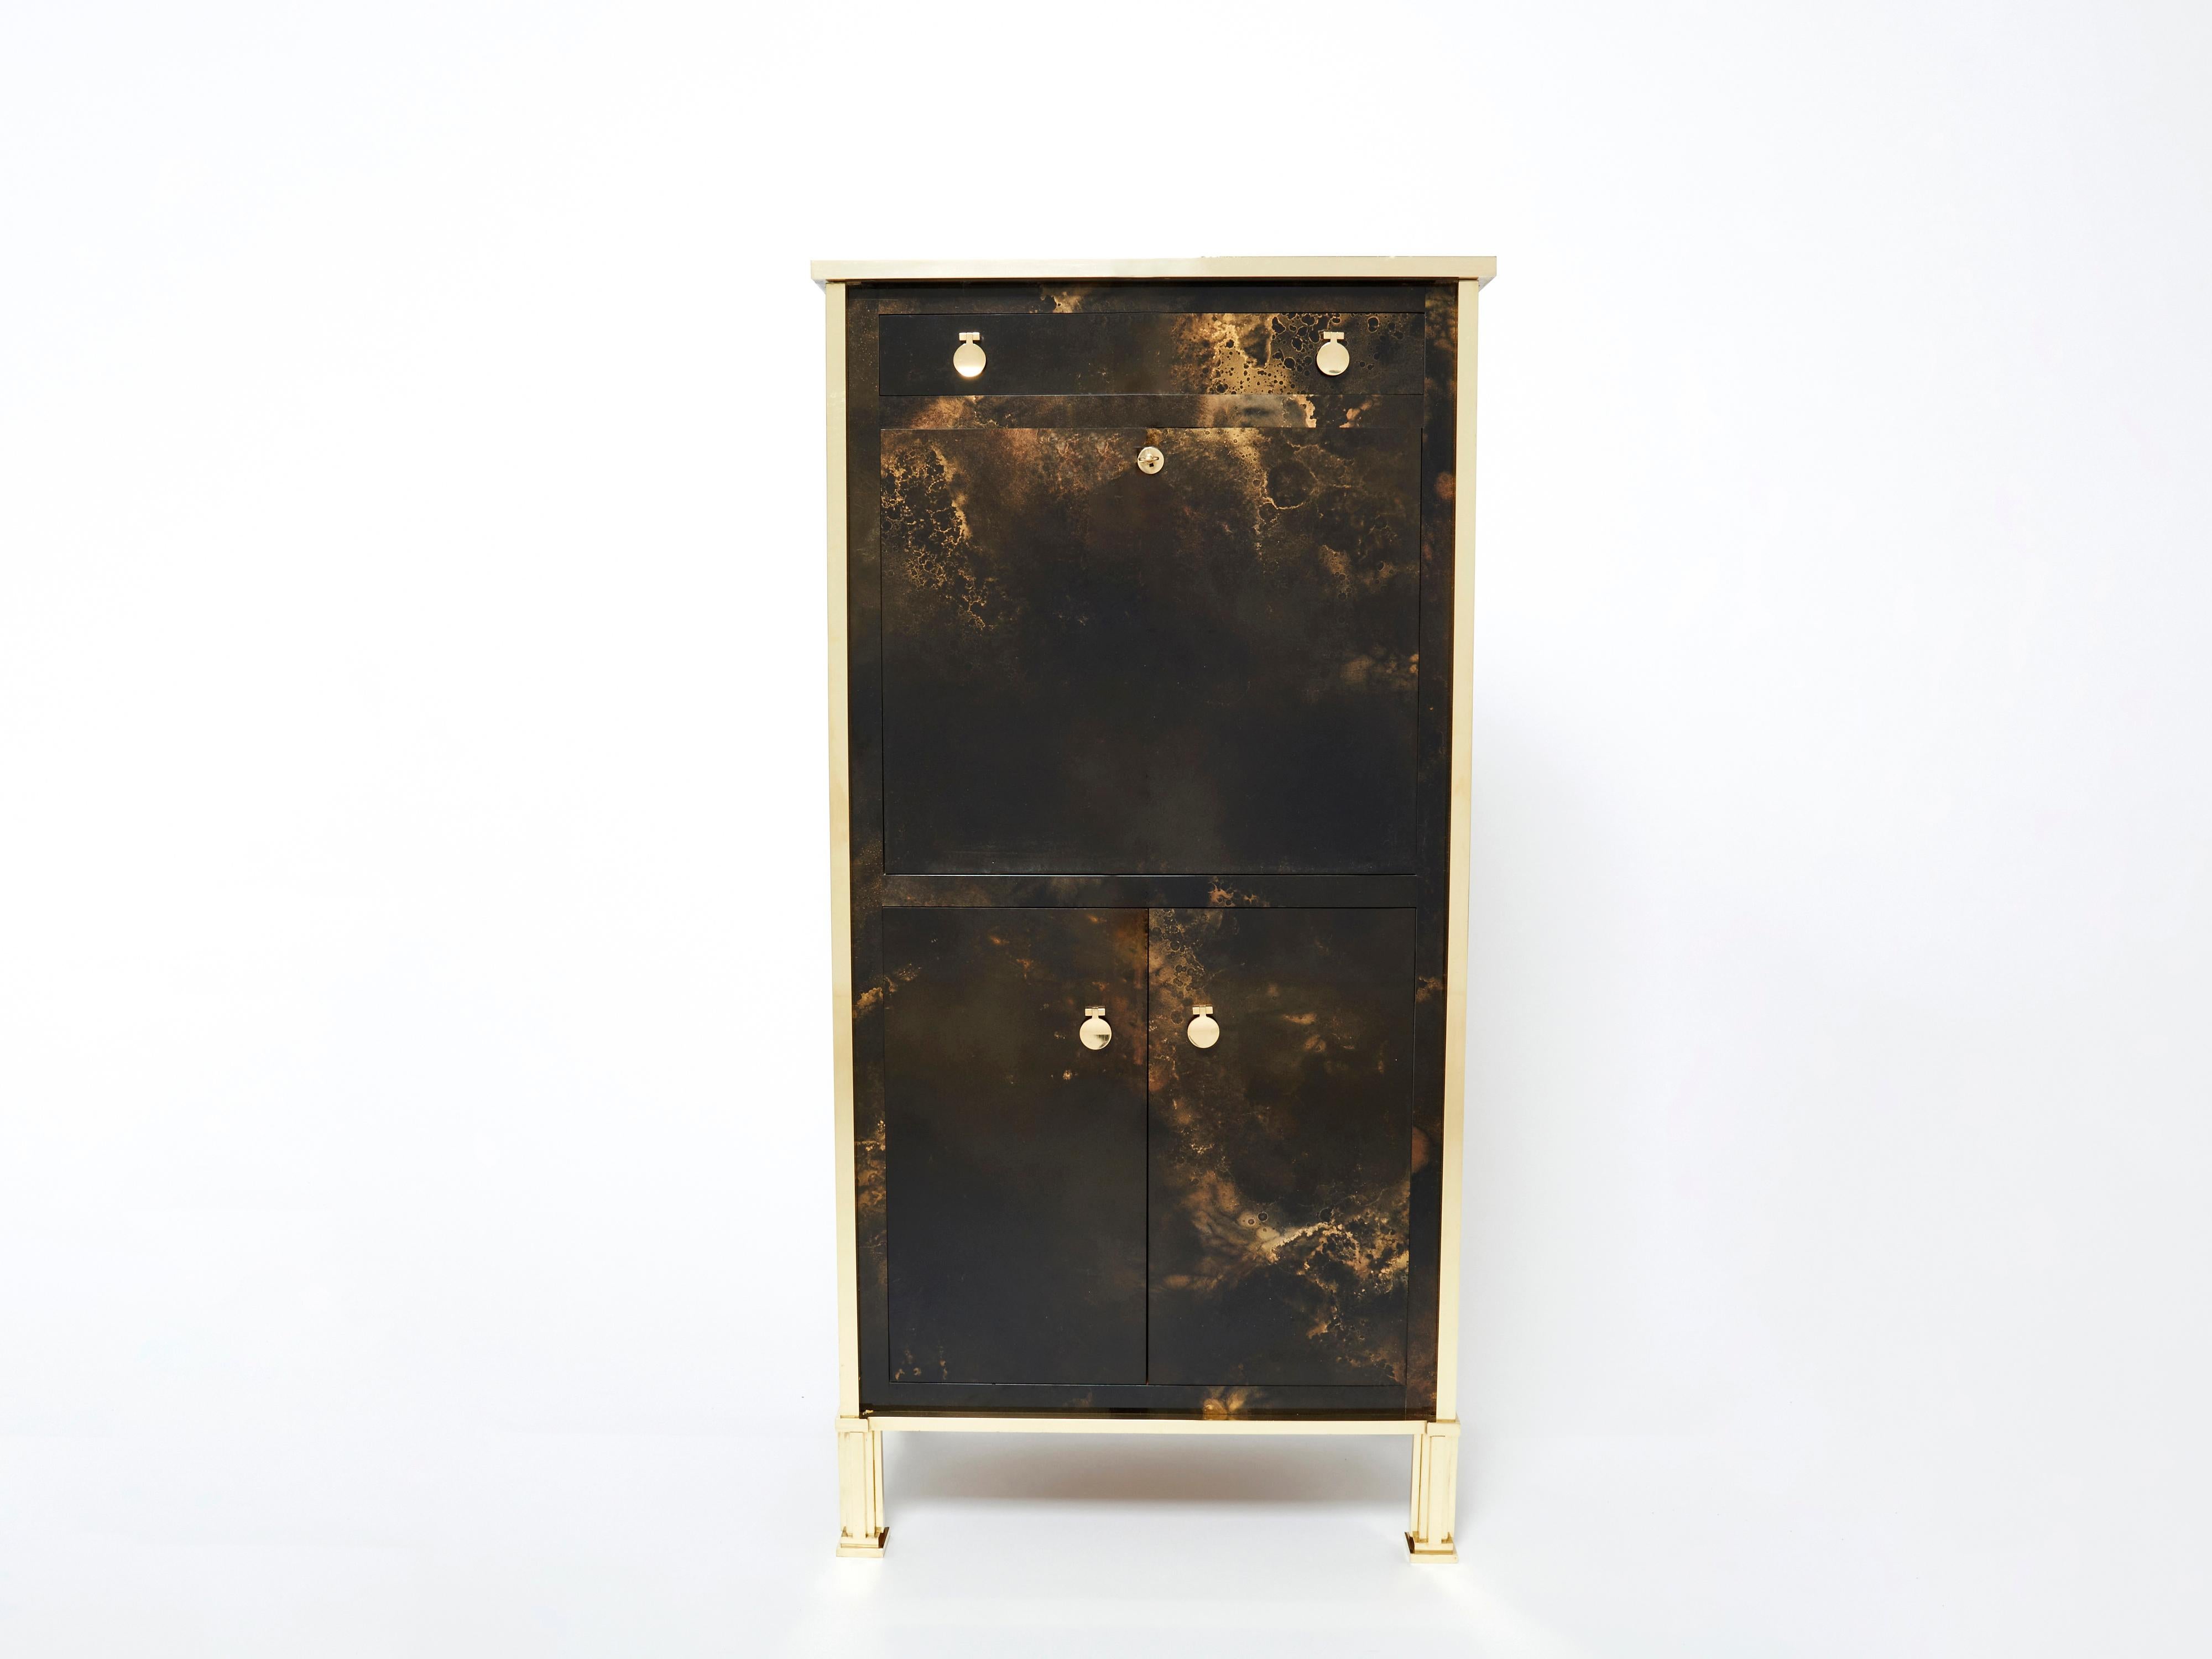 An exciting example of French design firm Maison Jansen’s commissioned pieces. This secretary cabinet is made from solid mahogany, lacquered in a rich dark brown and bronze–golden finish. The resulting effect is a beautiful mottling of color around